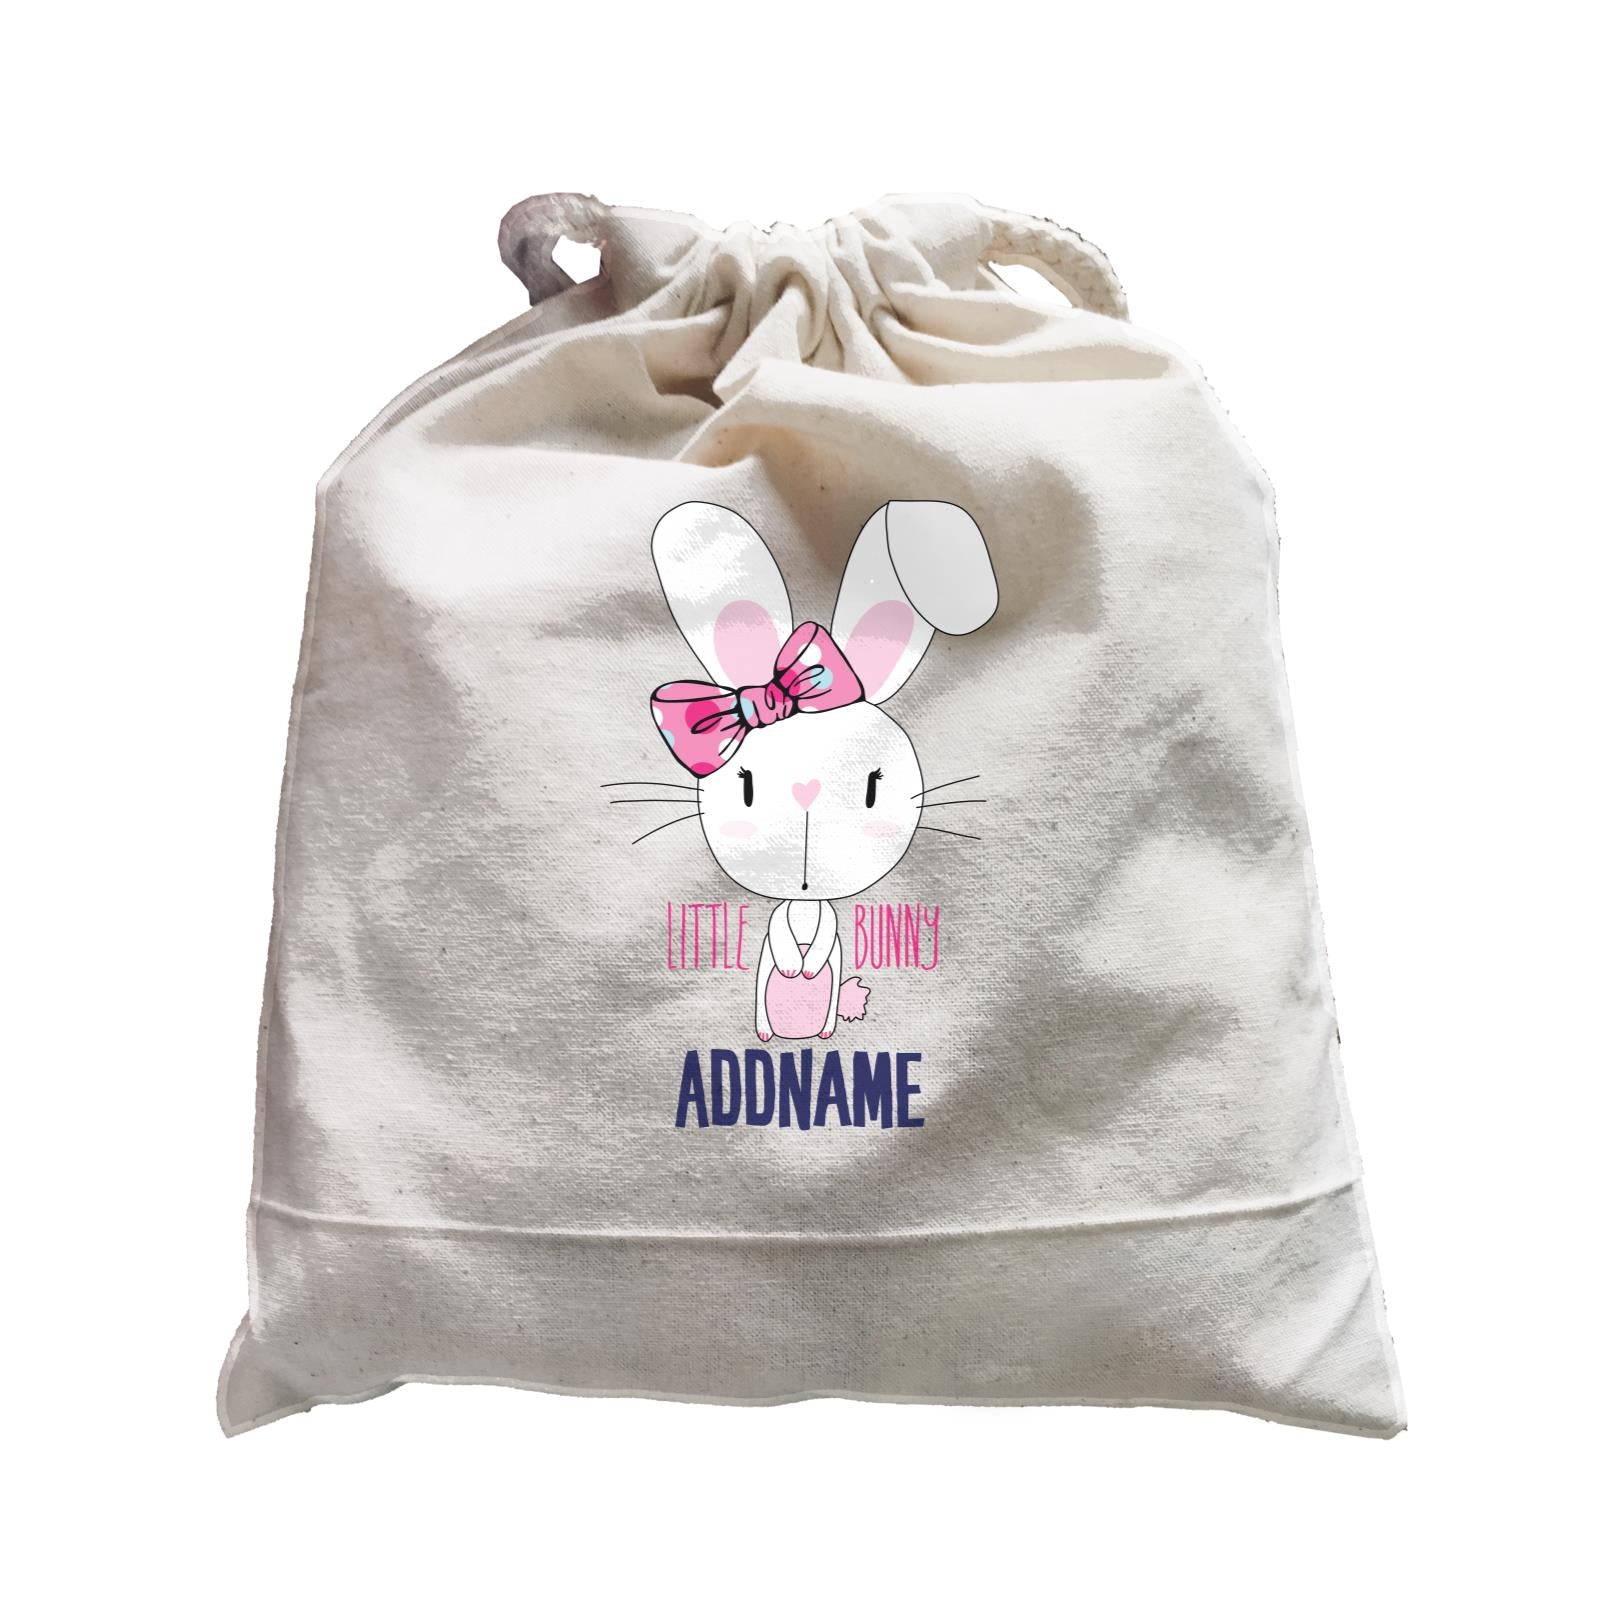 Cool Vibrant Series Little Bunny With Ribbon Addname Satchel